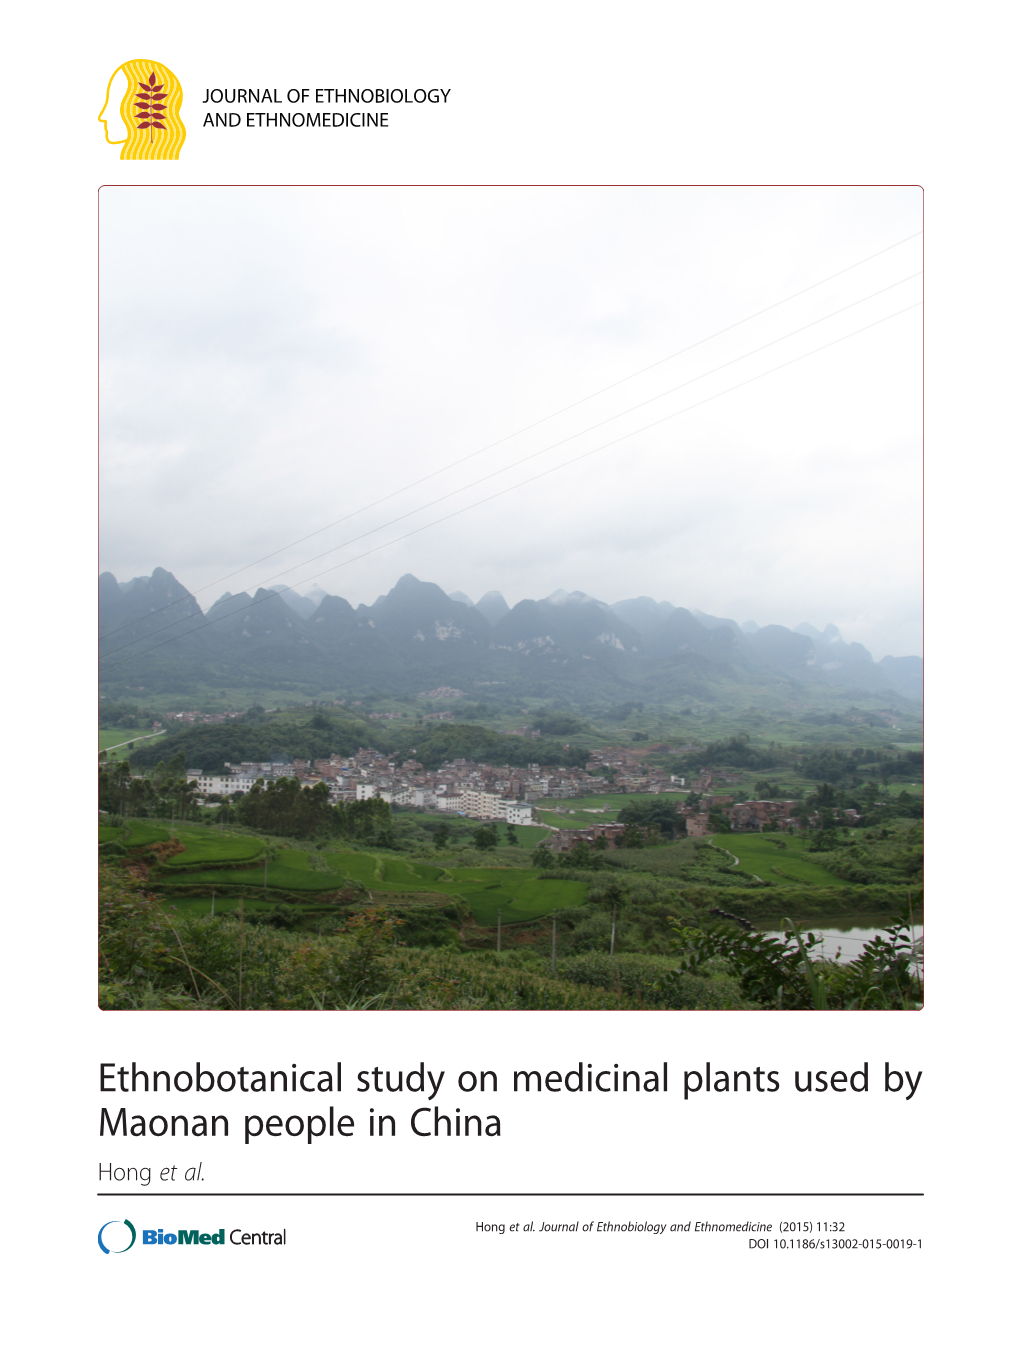 Ethnobotanical Study on Medicinal Plants Used by Maonan People in China Hong Et Al